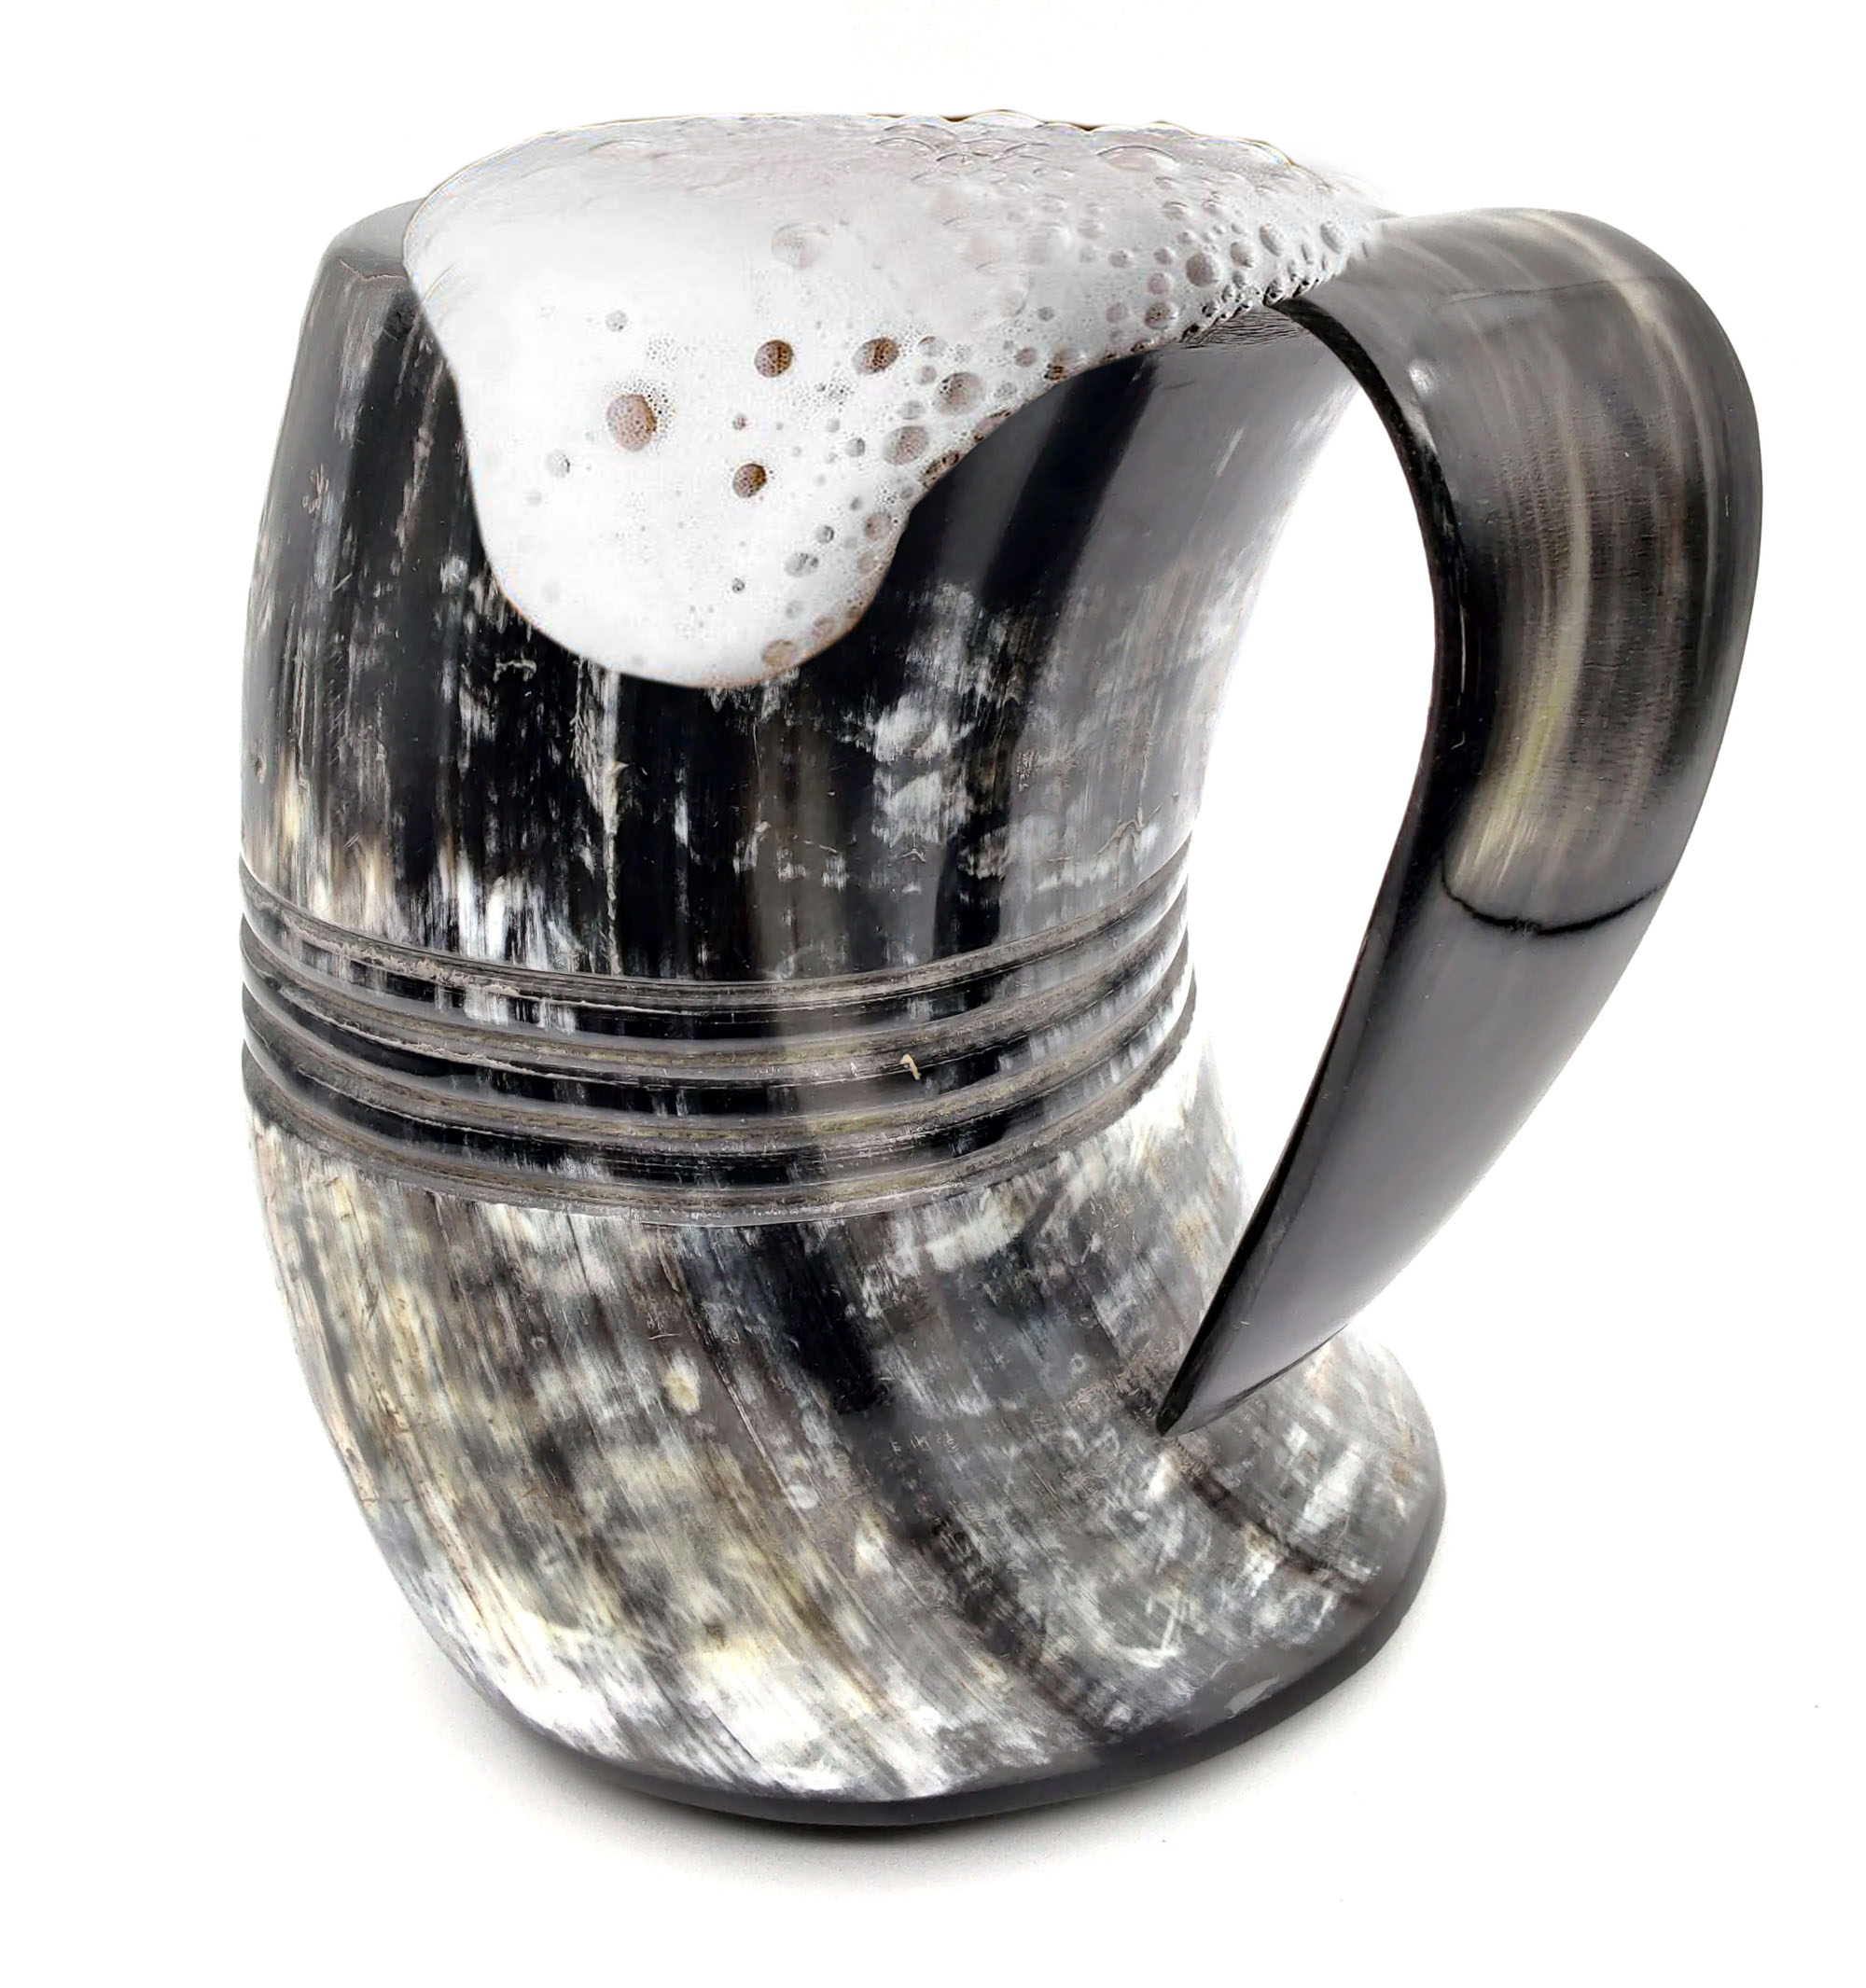 Great Craftsmanship And Gift Box Viking Drinking Horn Mug Drink Mead & Beer Like Gods of Old With This Large Ale Stein A Perfect Present For Real Men 20 Oz Handcrafted Ox Cup Goblet 